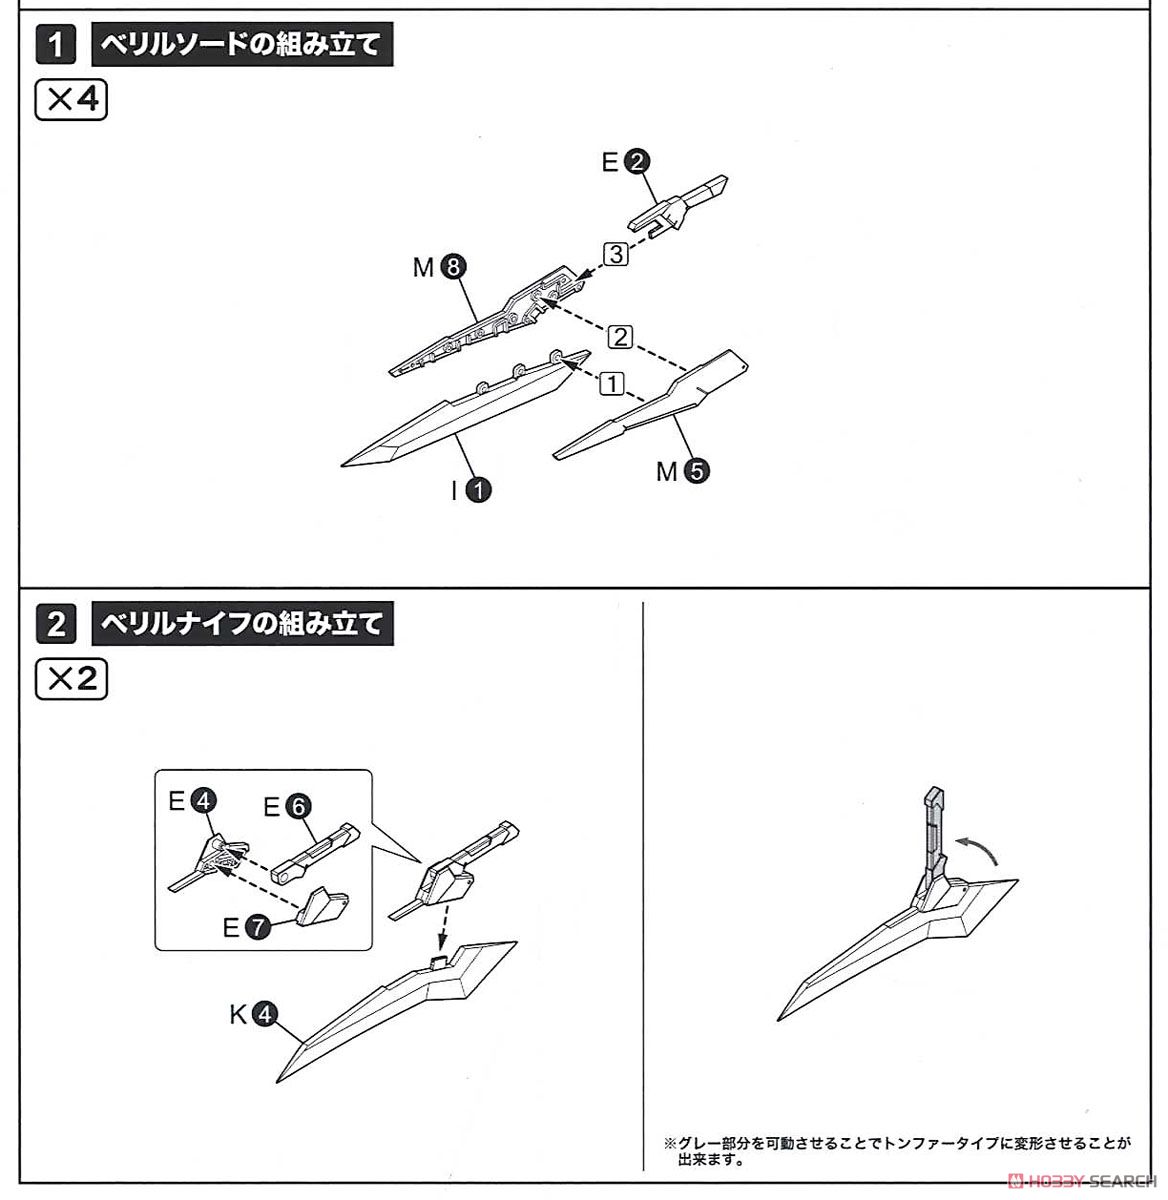 Extend Arms 06 (Arsenal Arms) (Plastic model) Assembly guide1